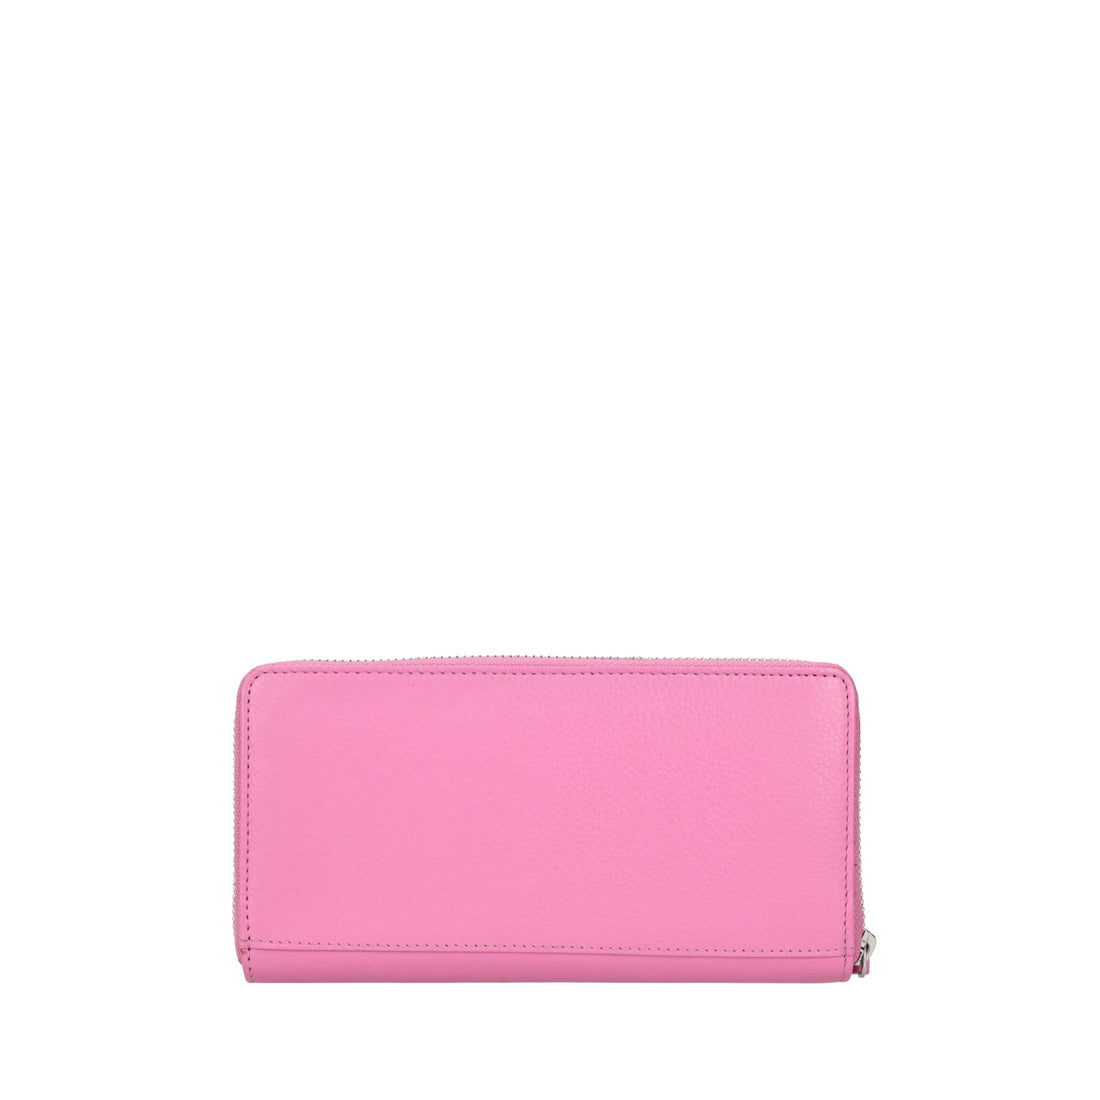 PINK LARGE BASIC WALLETS WALLET IN GENUINE LEATHER